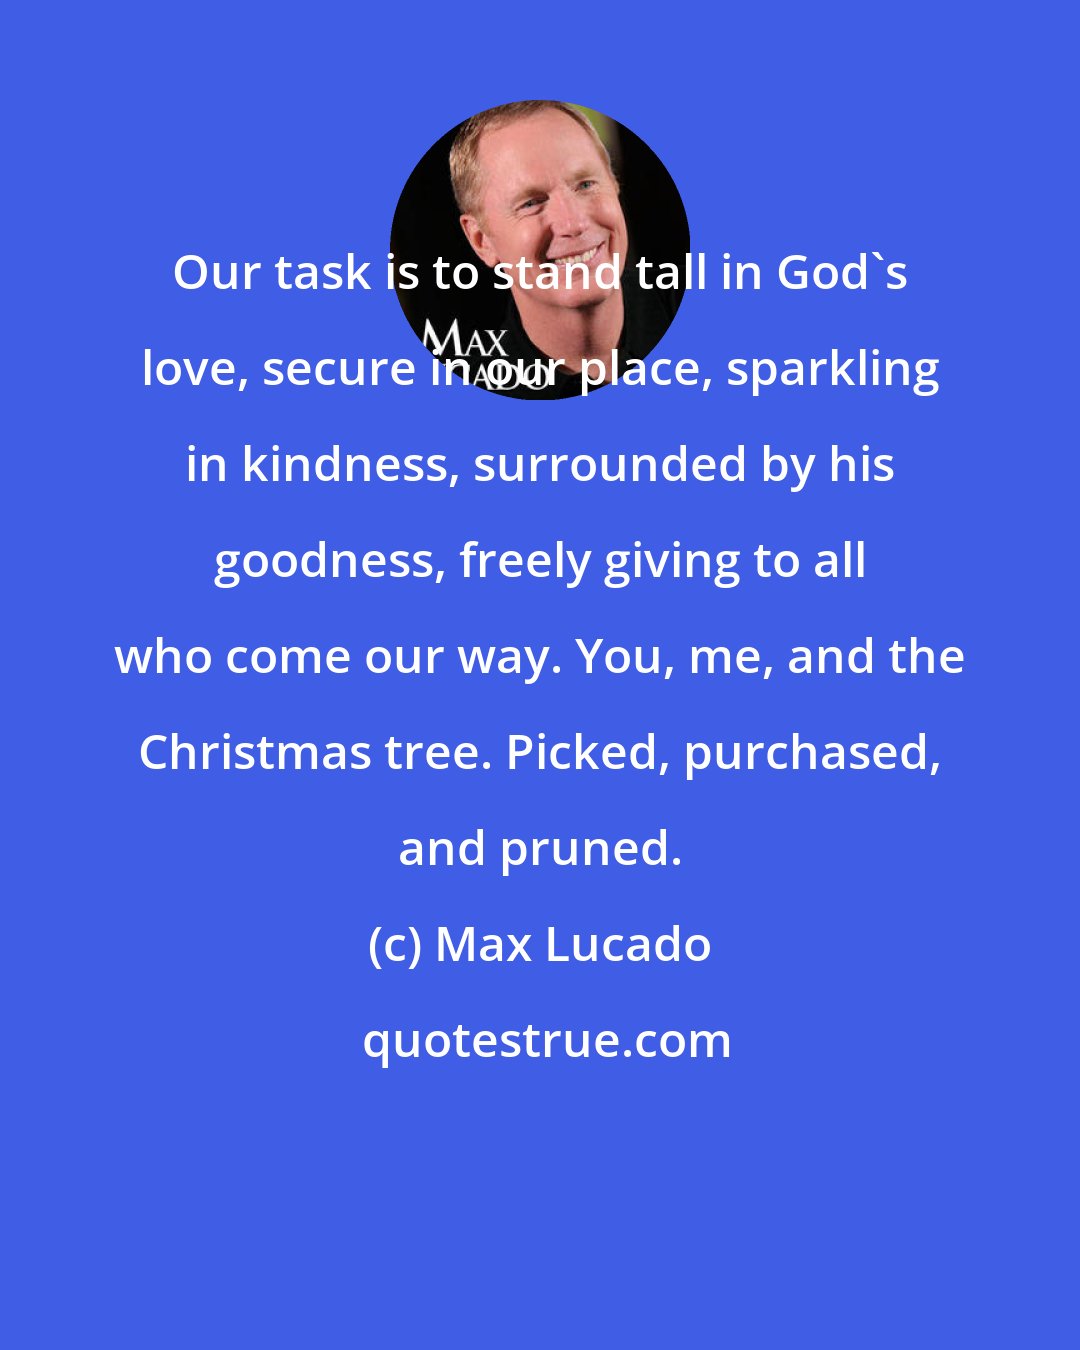 Max Lucado: Our task is to stand tall in God's love, secure in our place, sparkling in kindness, surrounded by his goodness, freely giving to all who come our way. You, me, and the Christmas tree. Picked, purchased, and pruned.